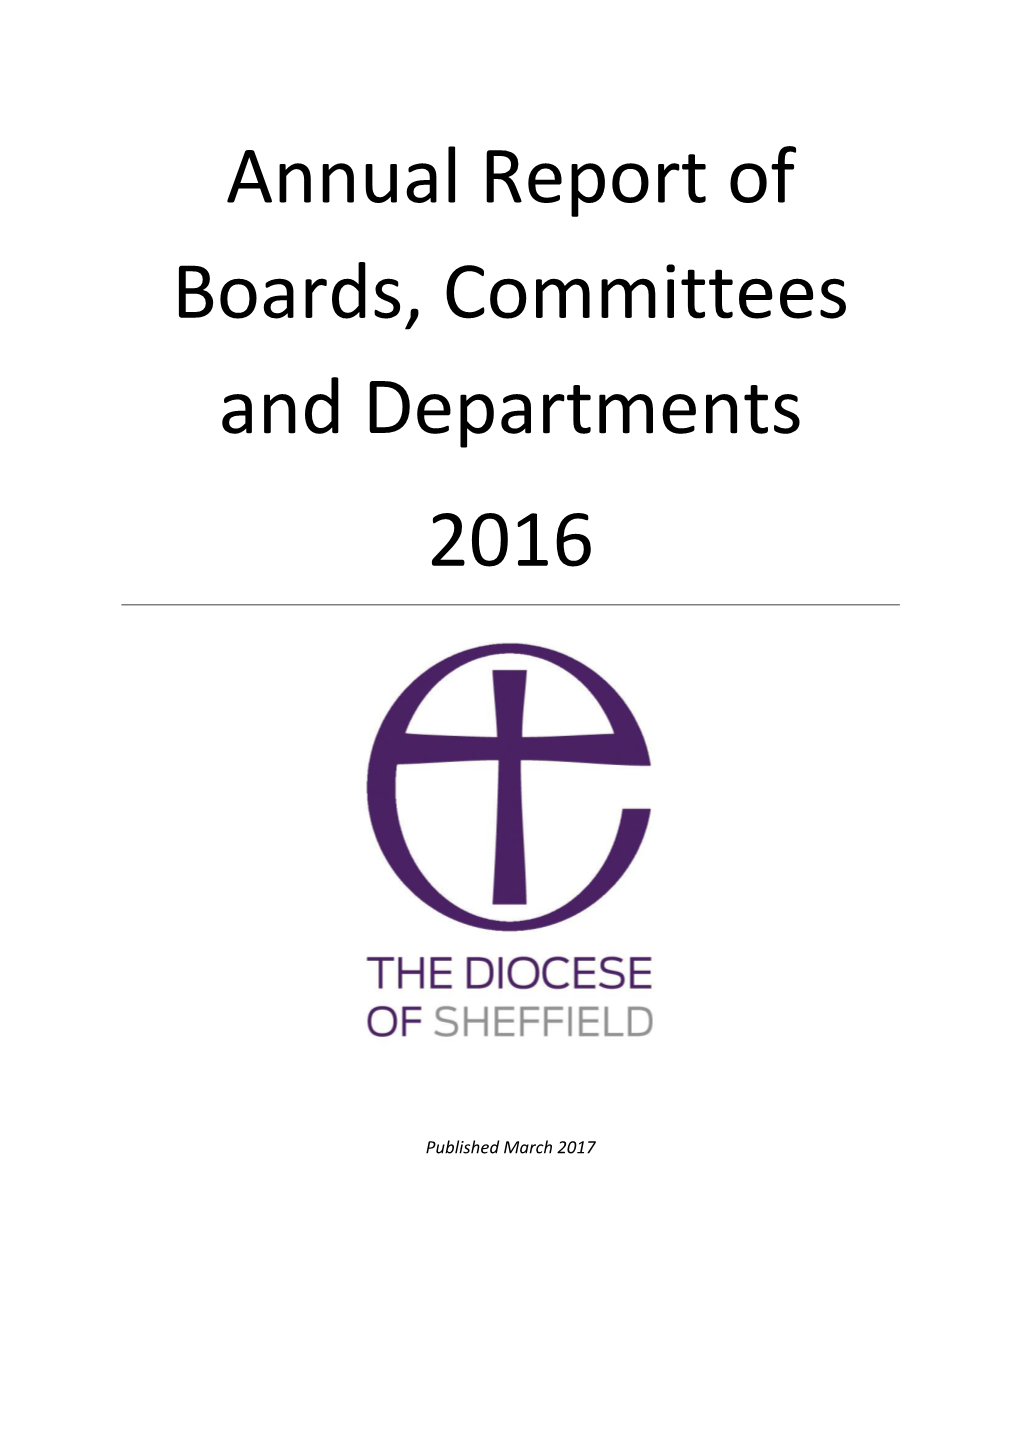 Annual Report of Boards, Committees and Departments 2016